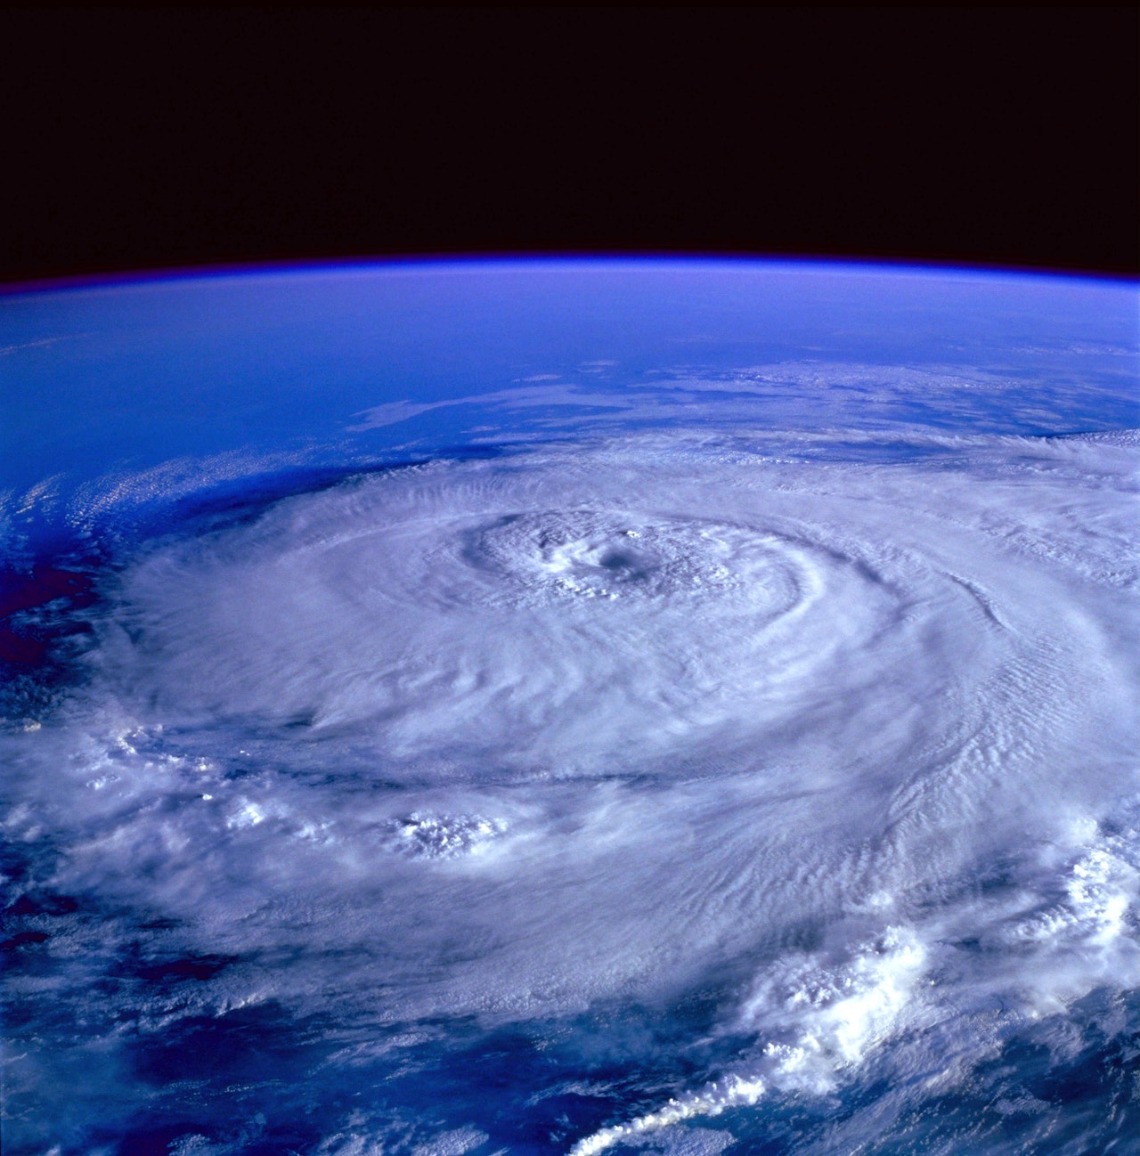 Image of hurricane from space